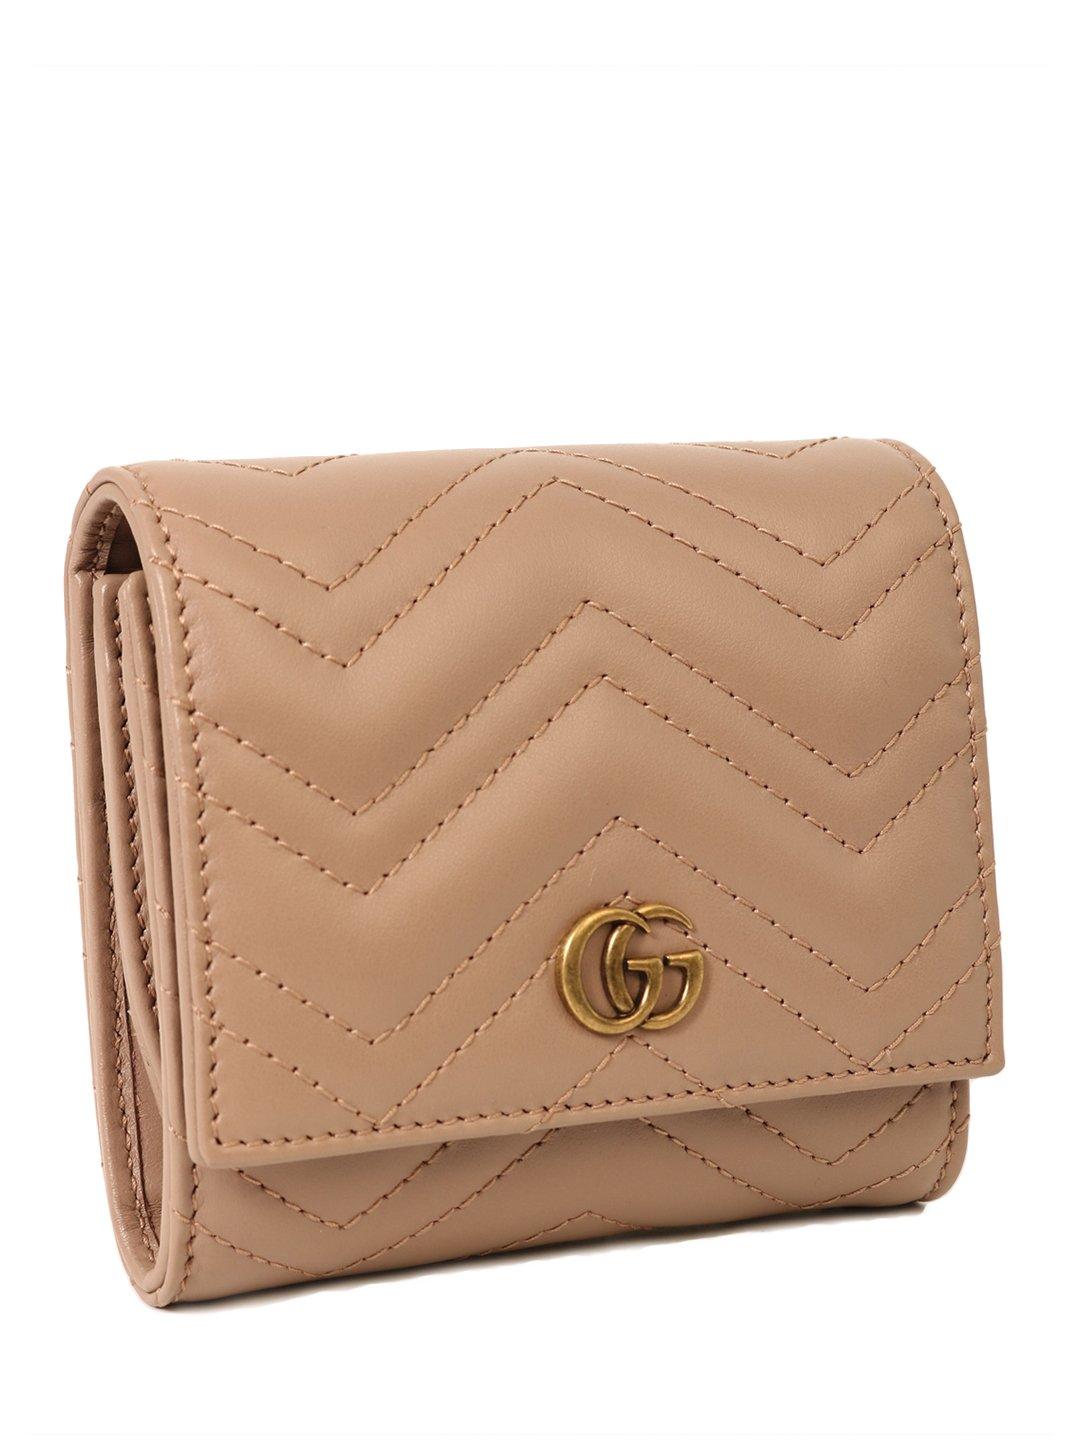 Gucci Leather Quilted Marmont Wallet in Pink - Lyst